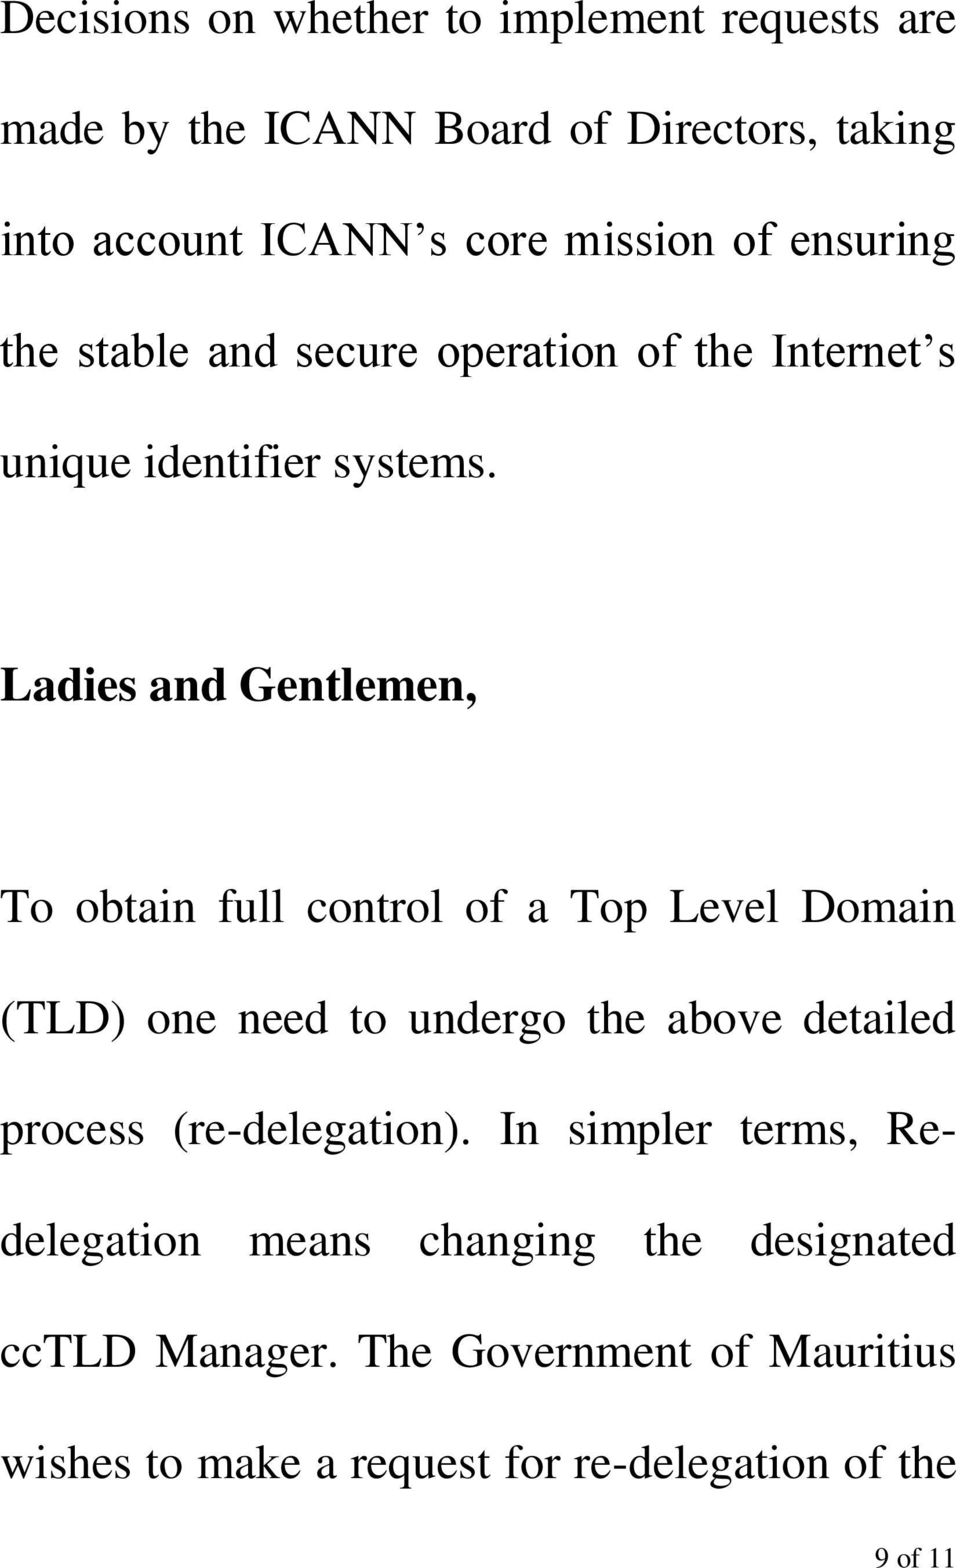 Ladies and Gentlemen, To obtain full control of a Top Level Domain (TLD) one need to undergo the above detailed process